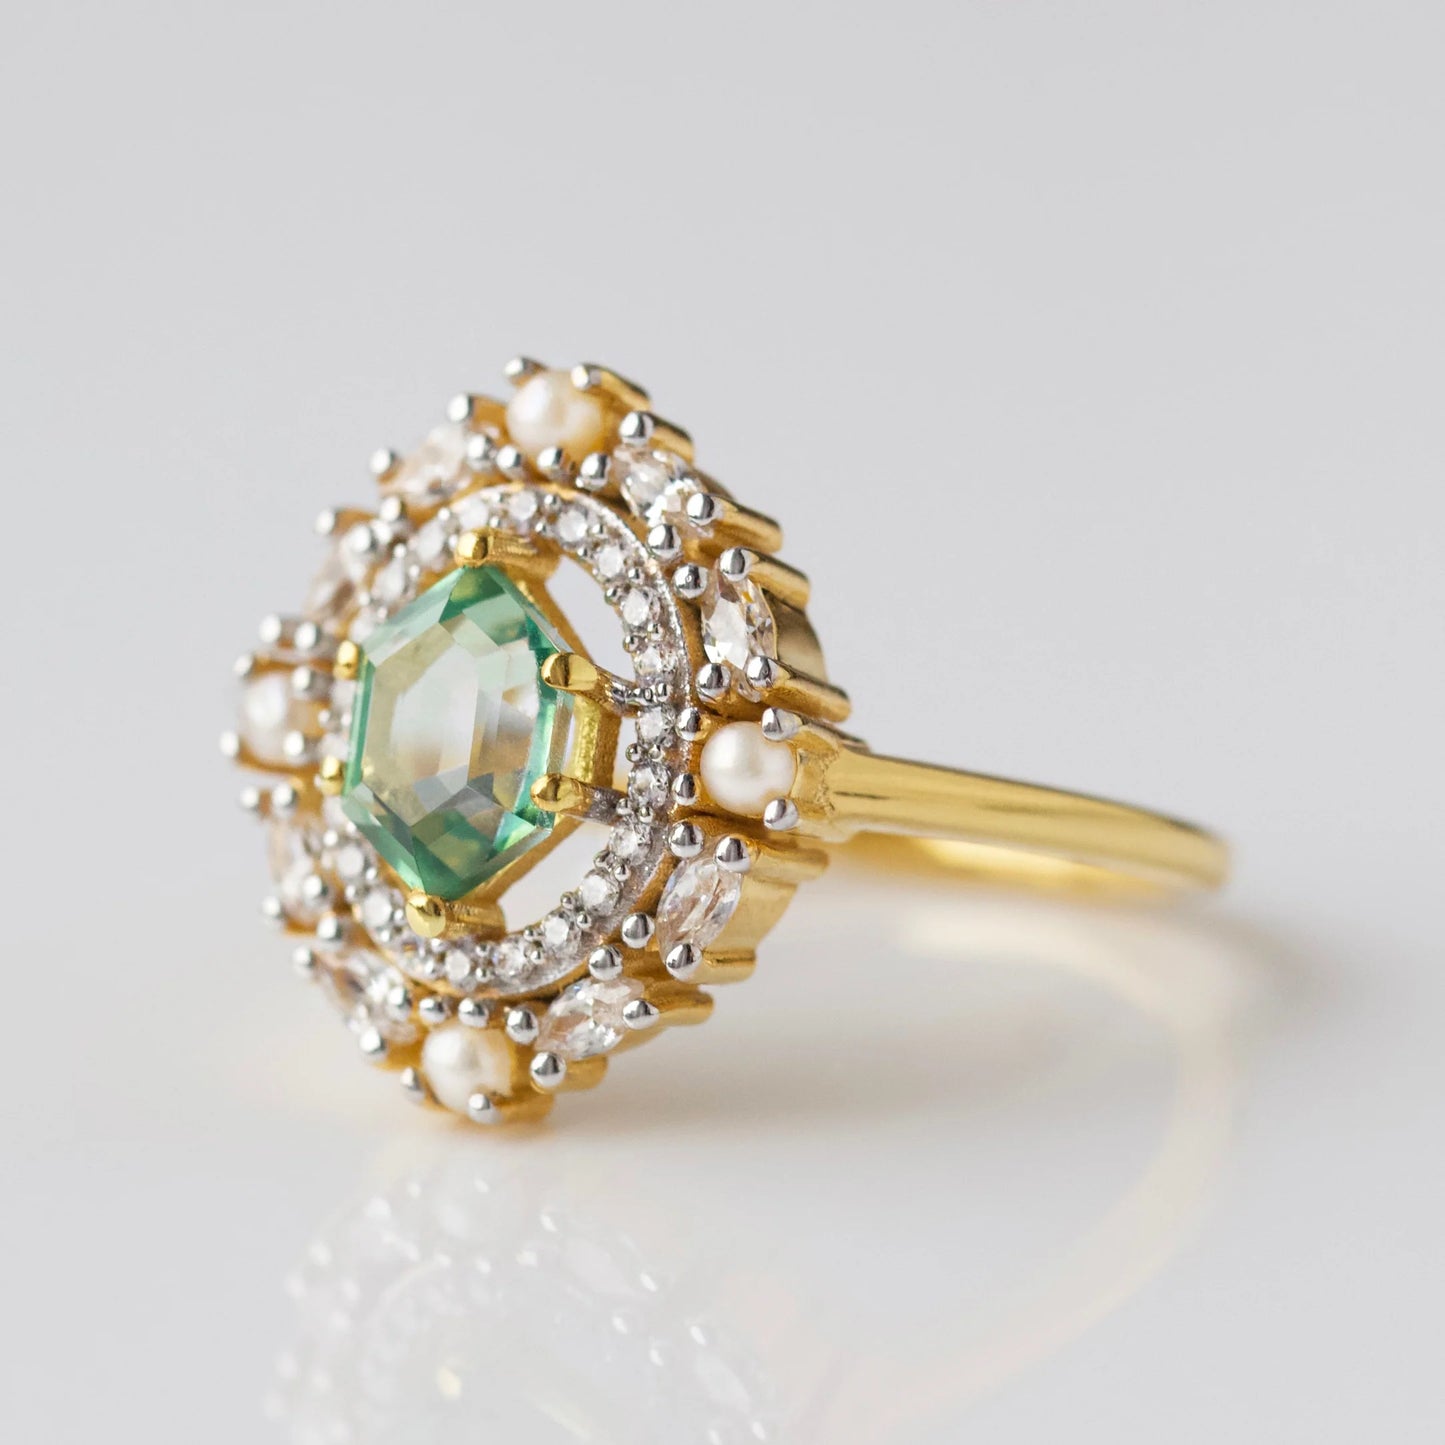 Fern Green Topaz Statement Ring with Pearl Halo